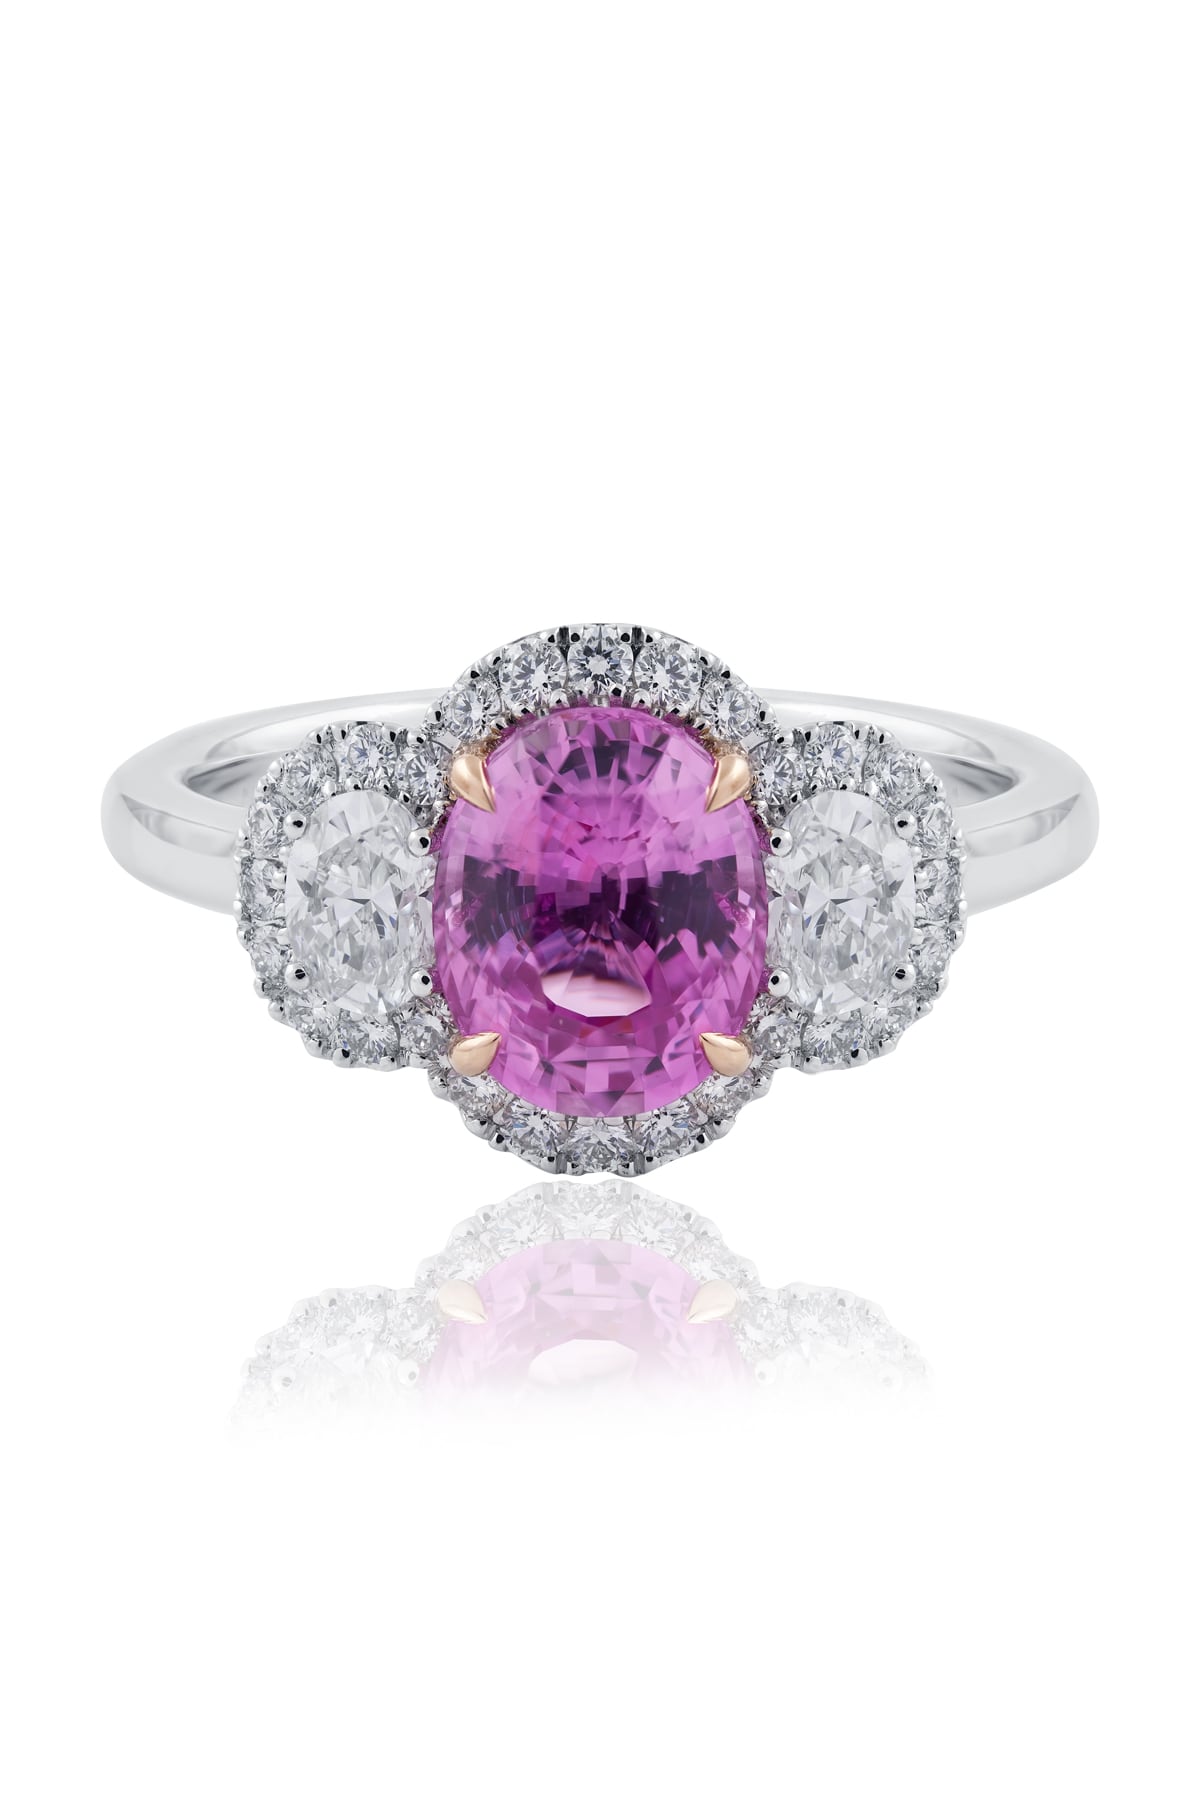 Natural Oval Pink Sapphire & Diamond Ring from LeGassick.